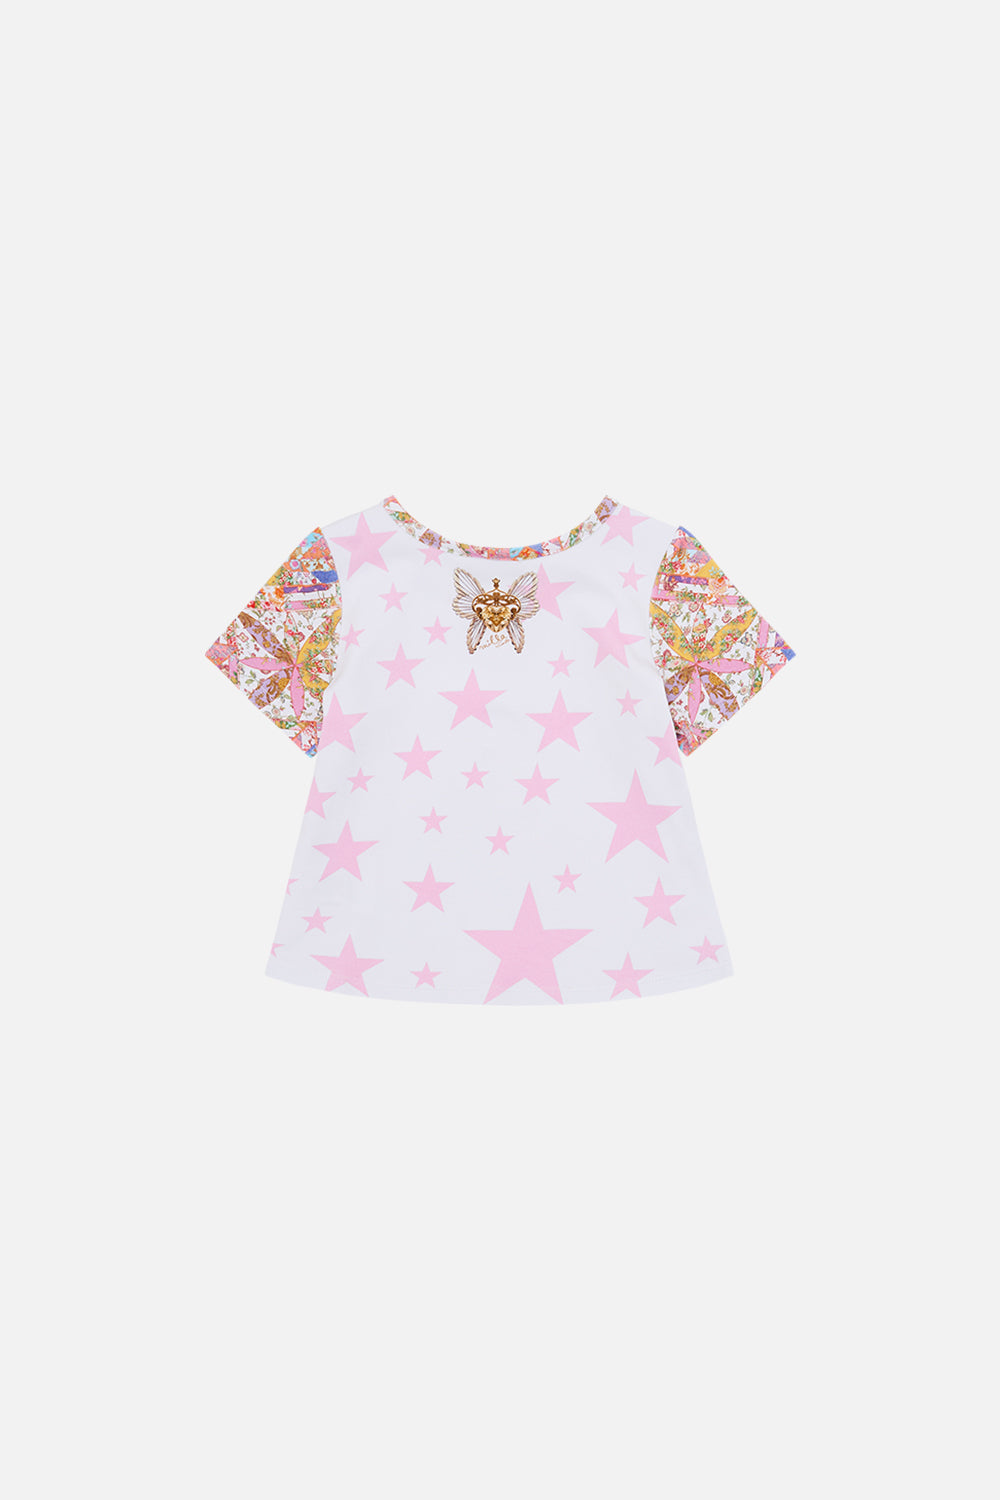 Milla by CAMILLA floral babies short sleeve tee in Sew Yesterday